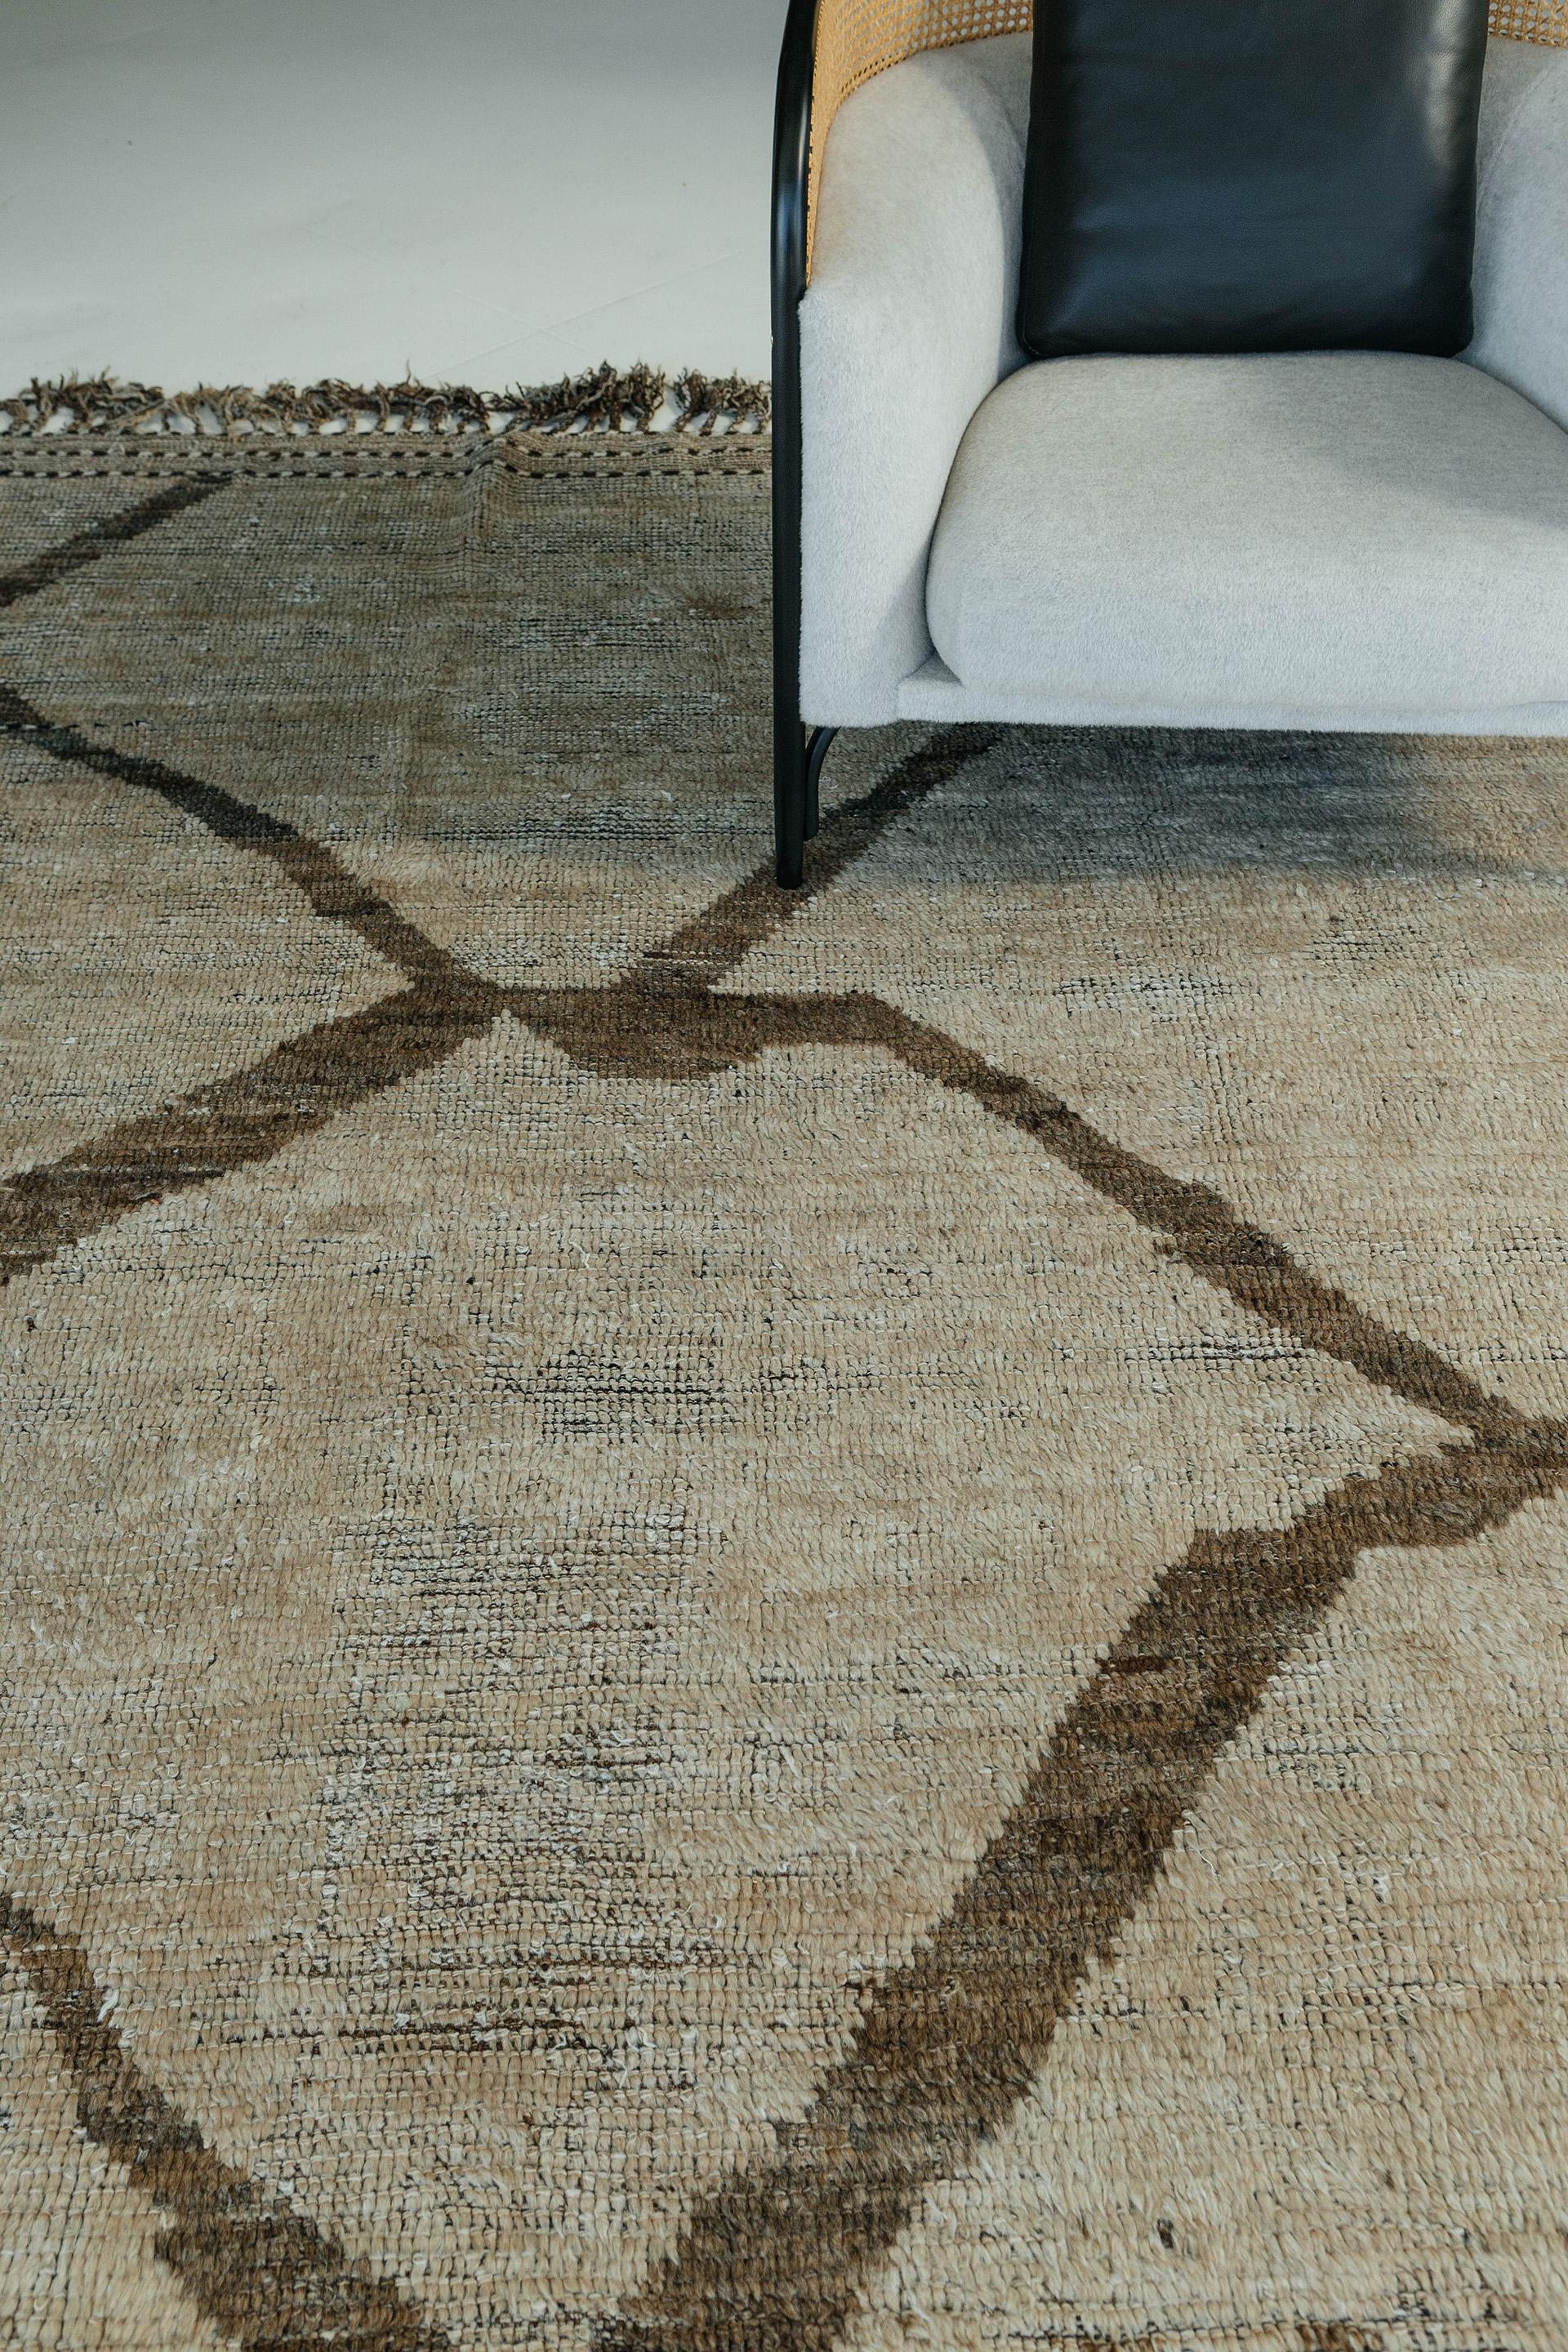 Esparto is a natural earth toned rug and a modern interpretation of the Moroccan world. This rug's irregular brown strokes resemble the fibers of nature and their ability to be used for crafts such as cords and basketry. Designed in Los Angeles for